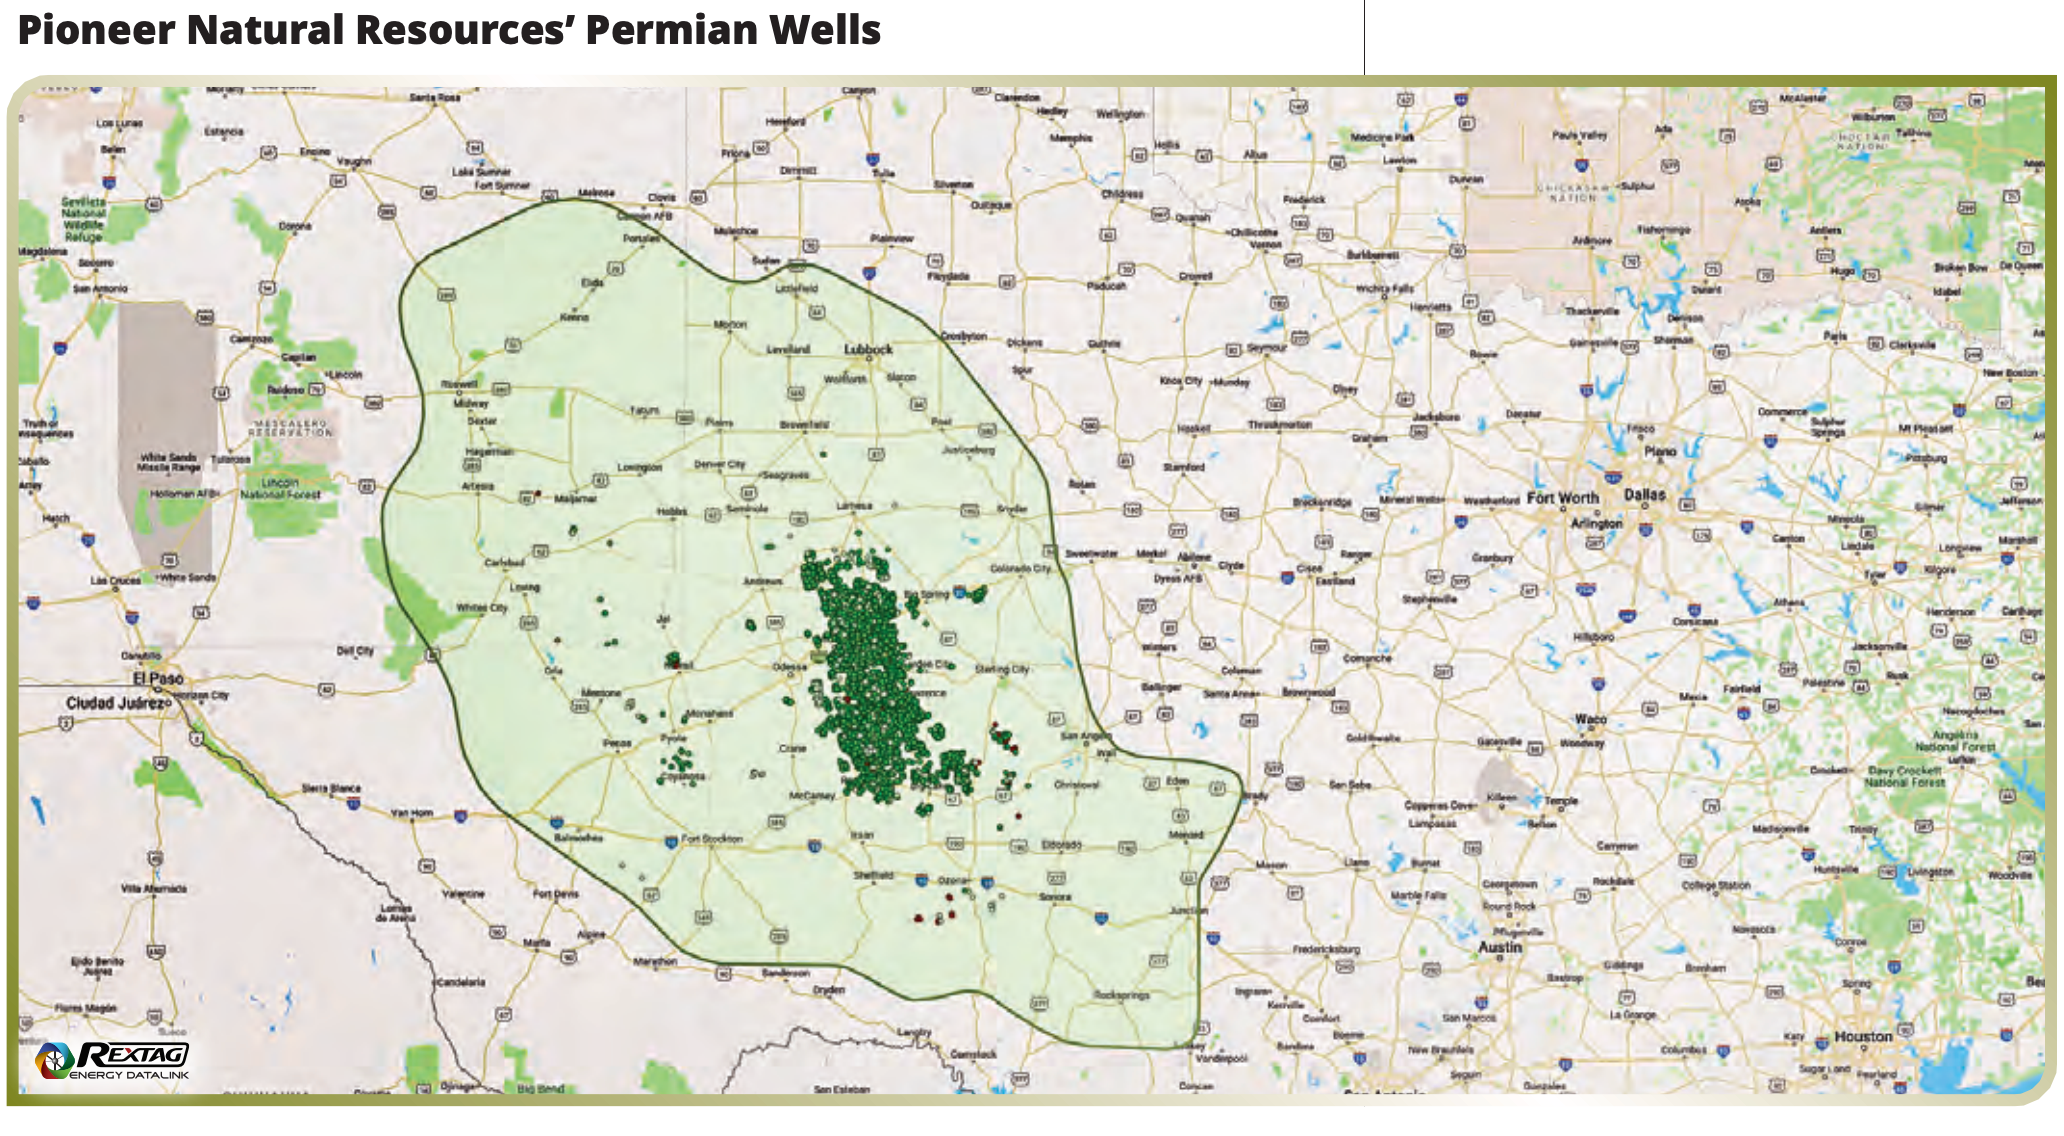 Oil and Gas Investor April 2022 The Permian Pursuit - Pioneer Natural Resources Permian Wells Rextag Map